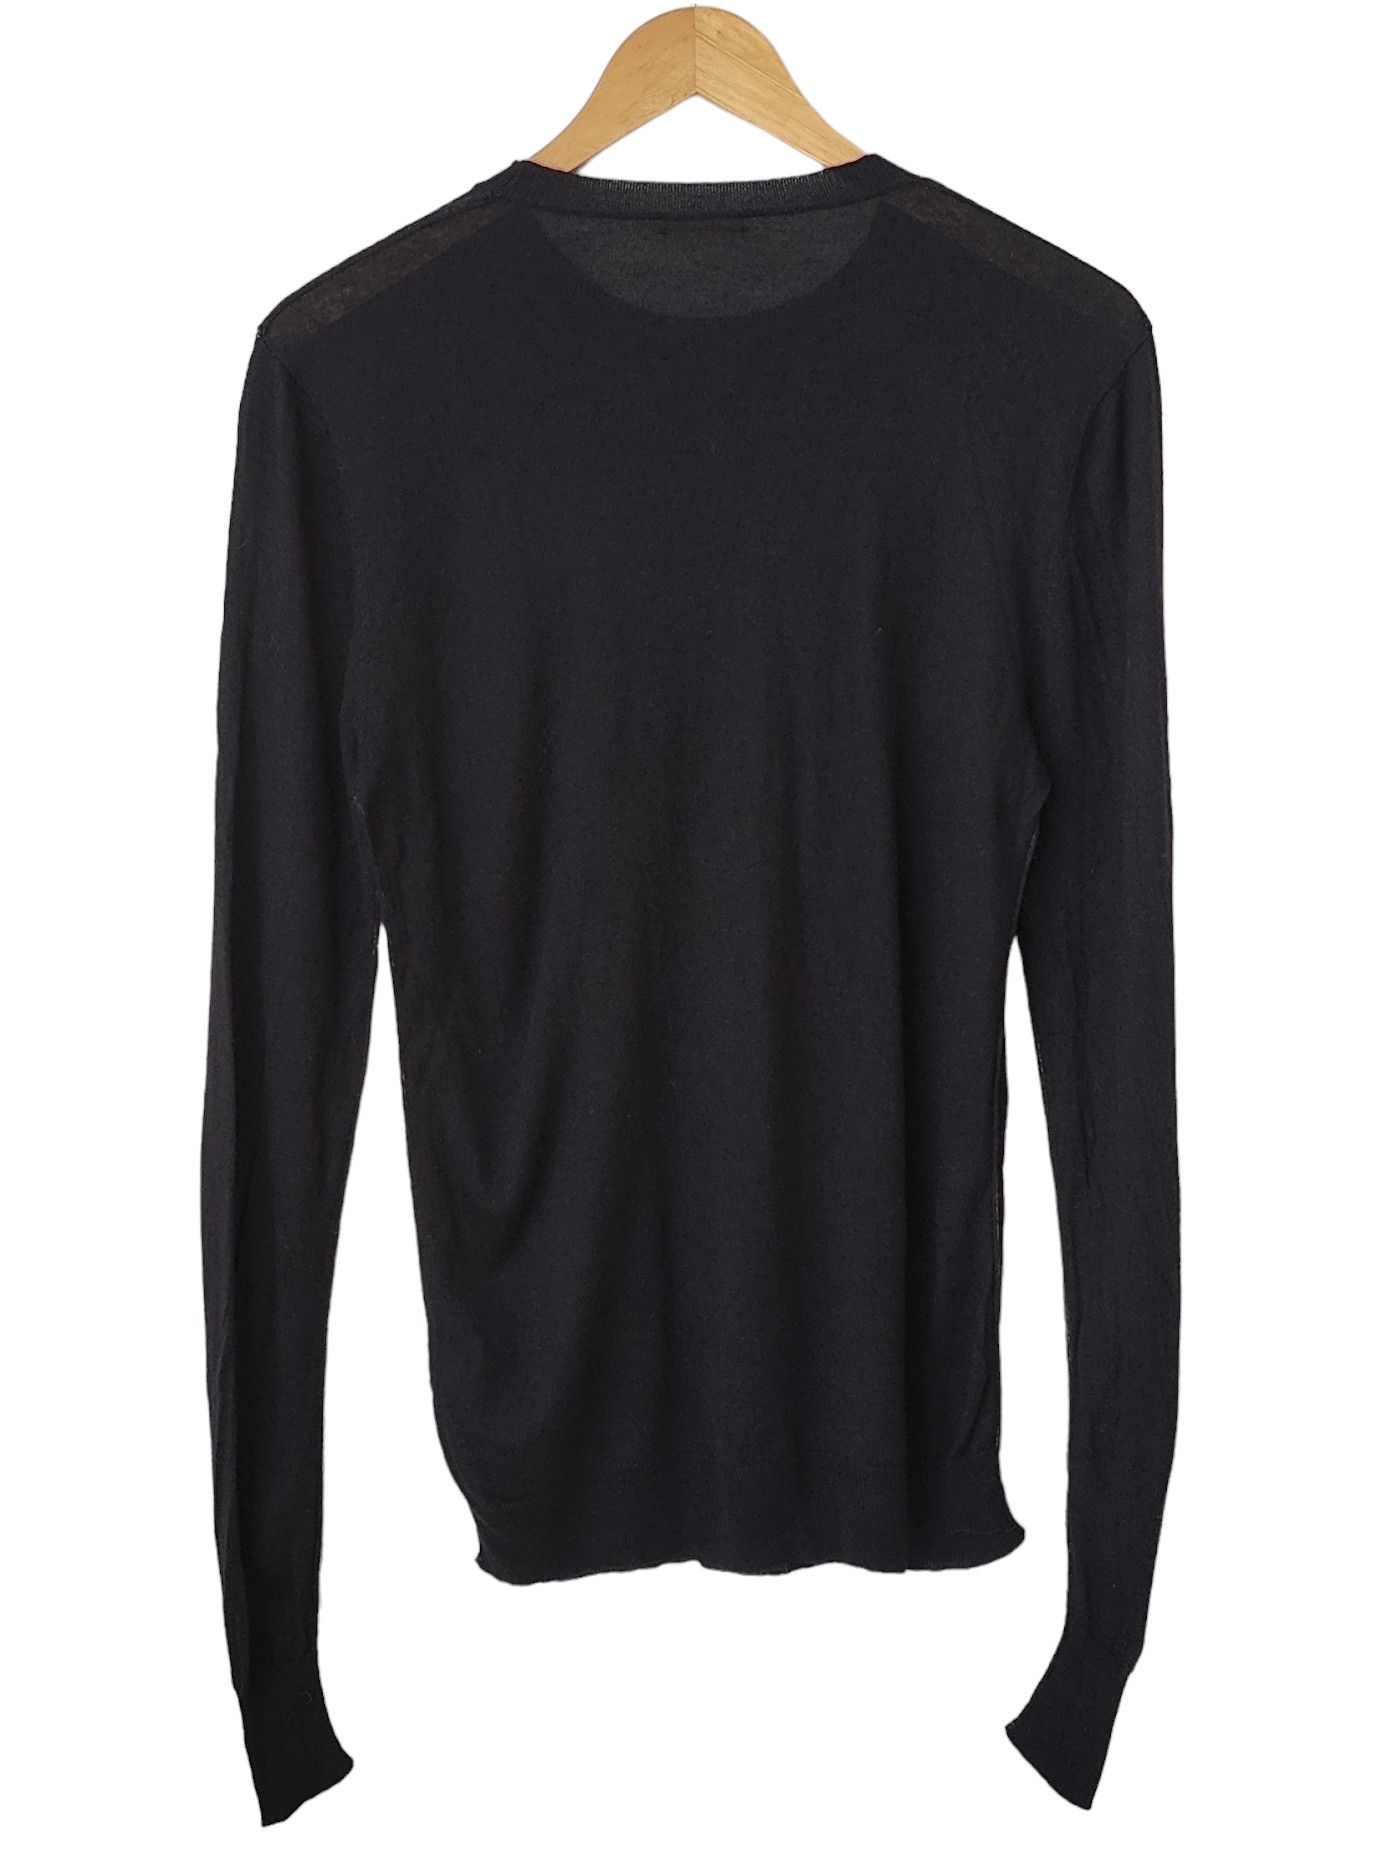 Archival Clothing John Galliano Archival 2011 Black Wool Knitted Sweater Size US S / EU 44-46 / 1 - 6 Thumbnail